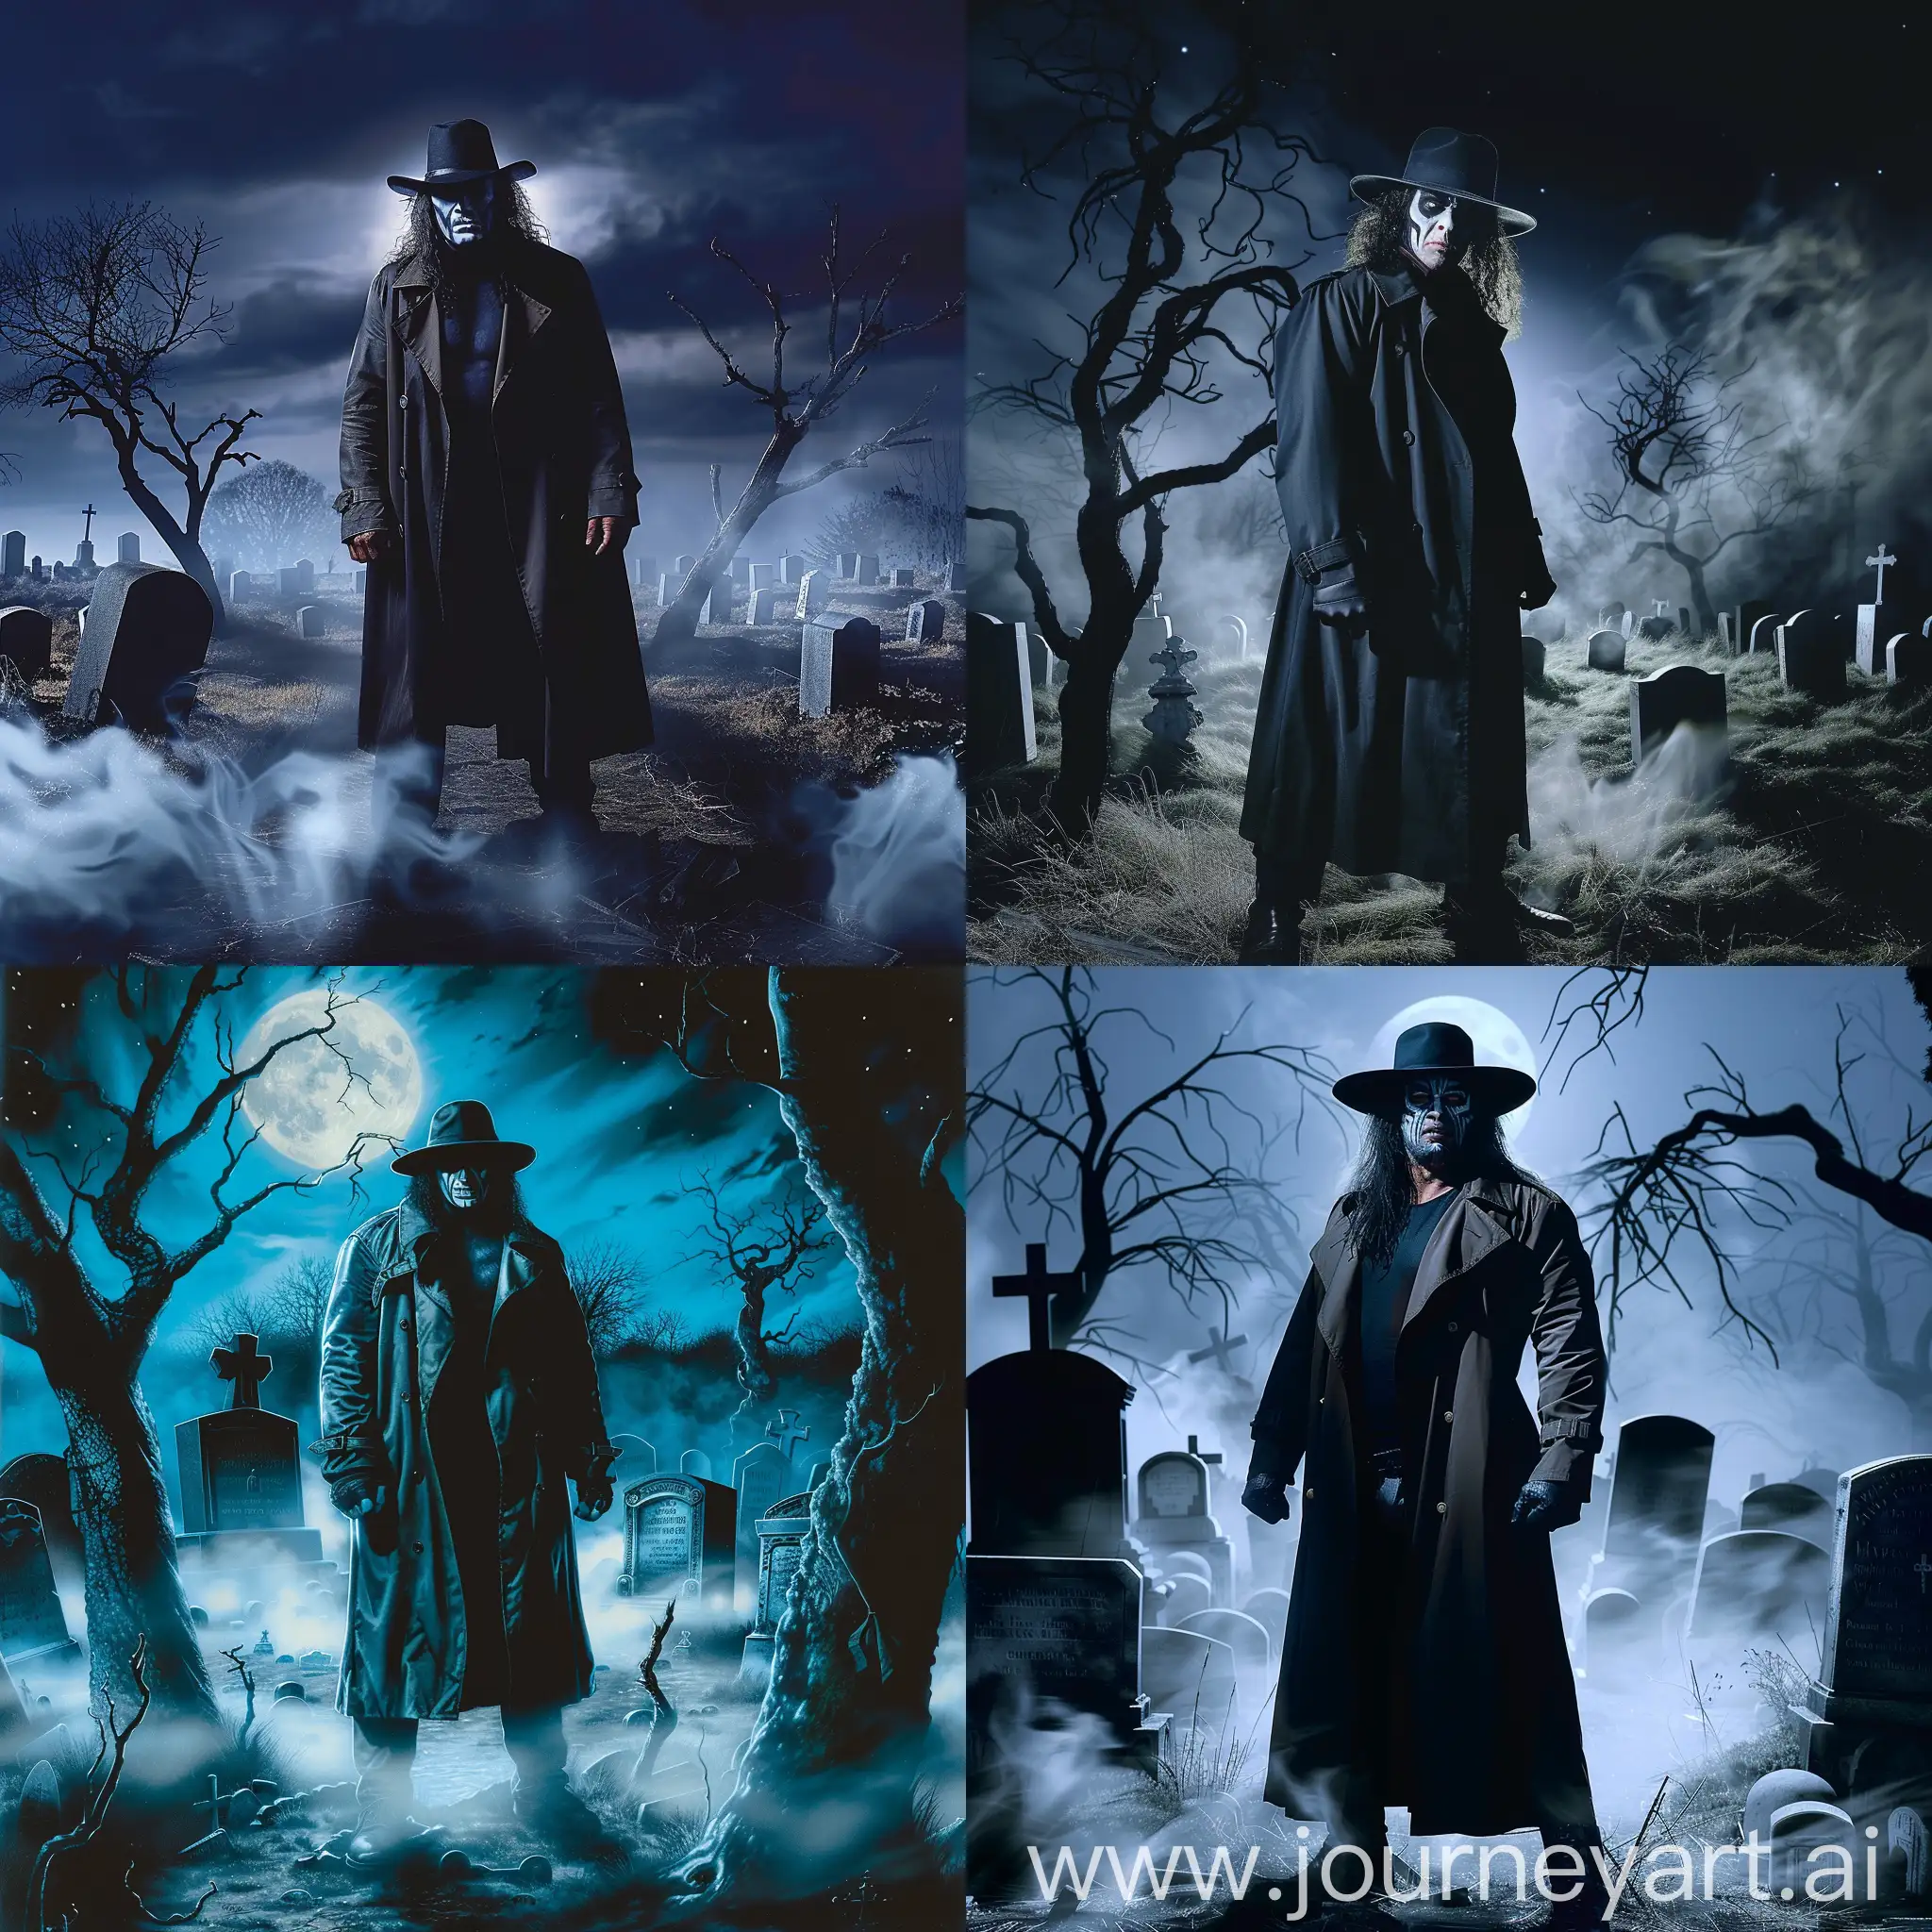 Set in the eerie ambiance of a dark graveyard under the moonlit sky, depict WWE superstar The Undertaker standing tall amidst ancient tombstones and twisted trees. Cloaked in his iconic trench coat and hat, his piercing gaze locks onto the viewer, exuding an aura of mystique and foreboding. Shadows dance across the landscape, emphasizing the solemn atmosphere as wisps of fog curl around his feet. In the background, ominous tombstones and mausoleums loom, casting long, sinister shadows. An air of supernatural energy surrounds The Undertaker, hinting at his legendary persona as the master of darkness and the guardian of the realm beyond. The scene is both haunting and captivating, inviting viewers to ponder the mysteries that lie within the depths of the night.